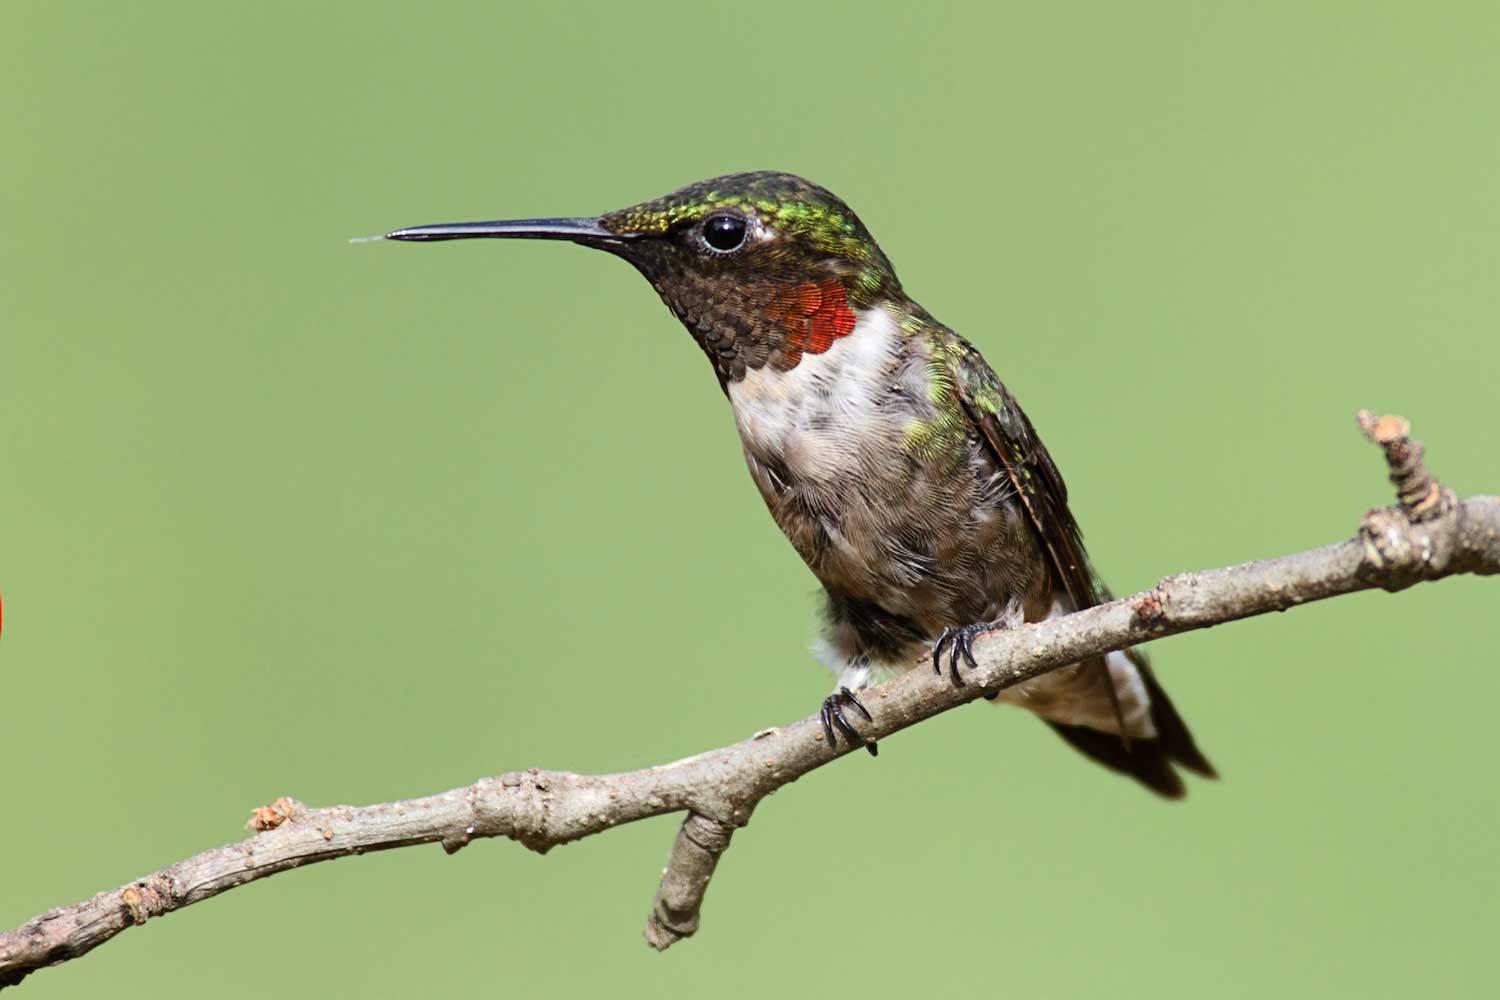 Hummingbird perched on a branch.